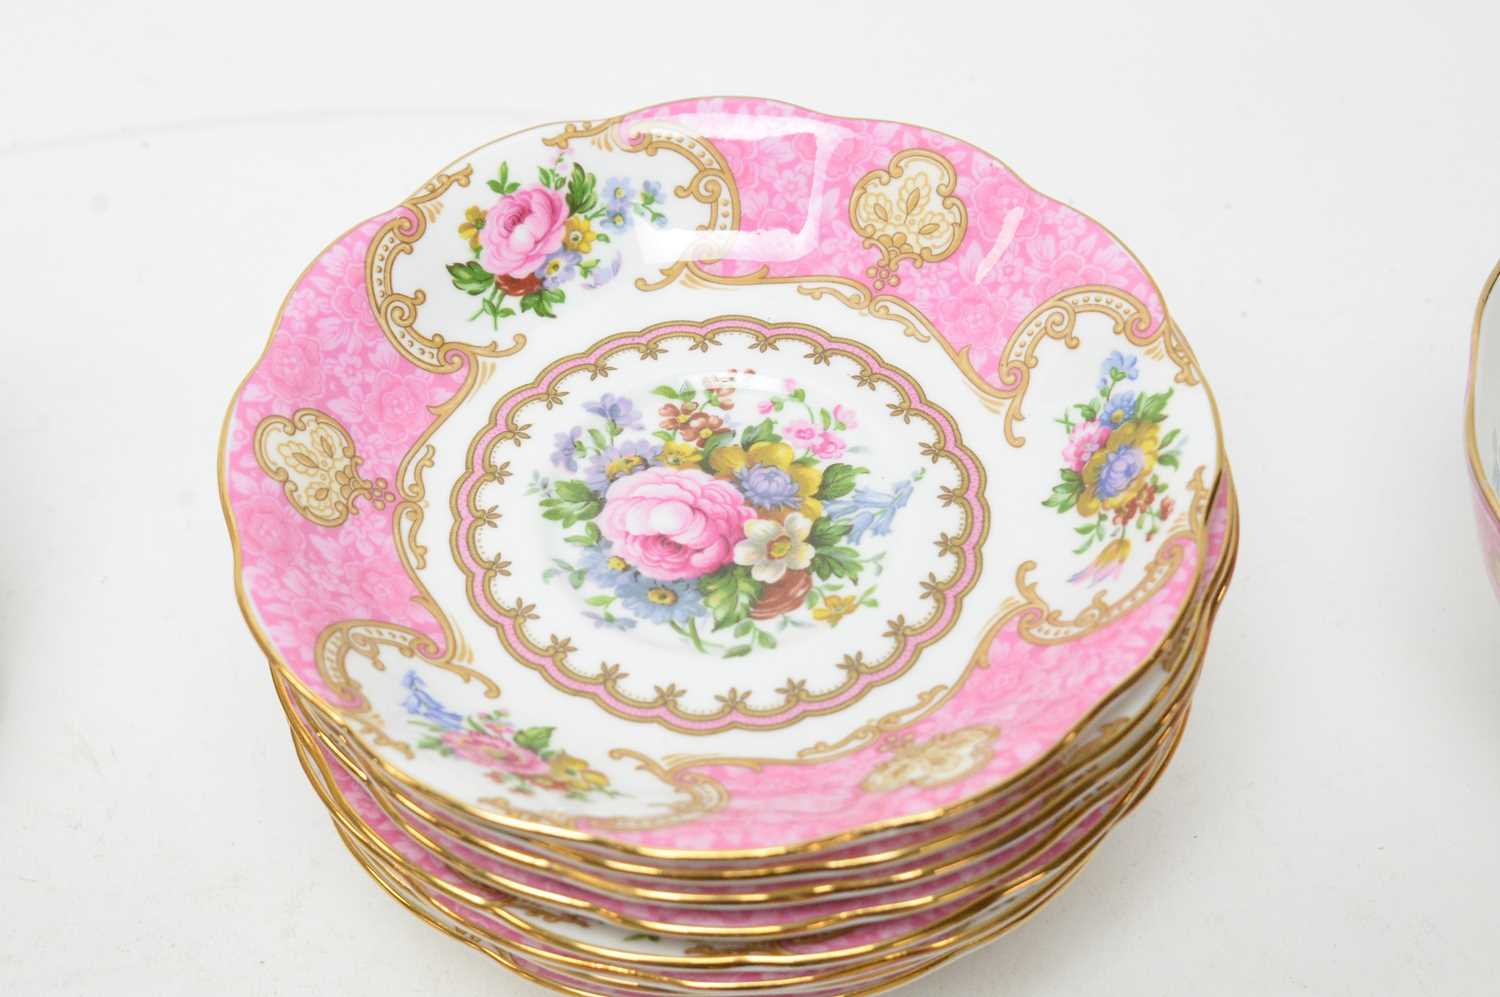 Royal Albert ‘Lady Carlyle’ floral decorated tea service - Image 4 of 4